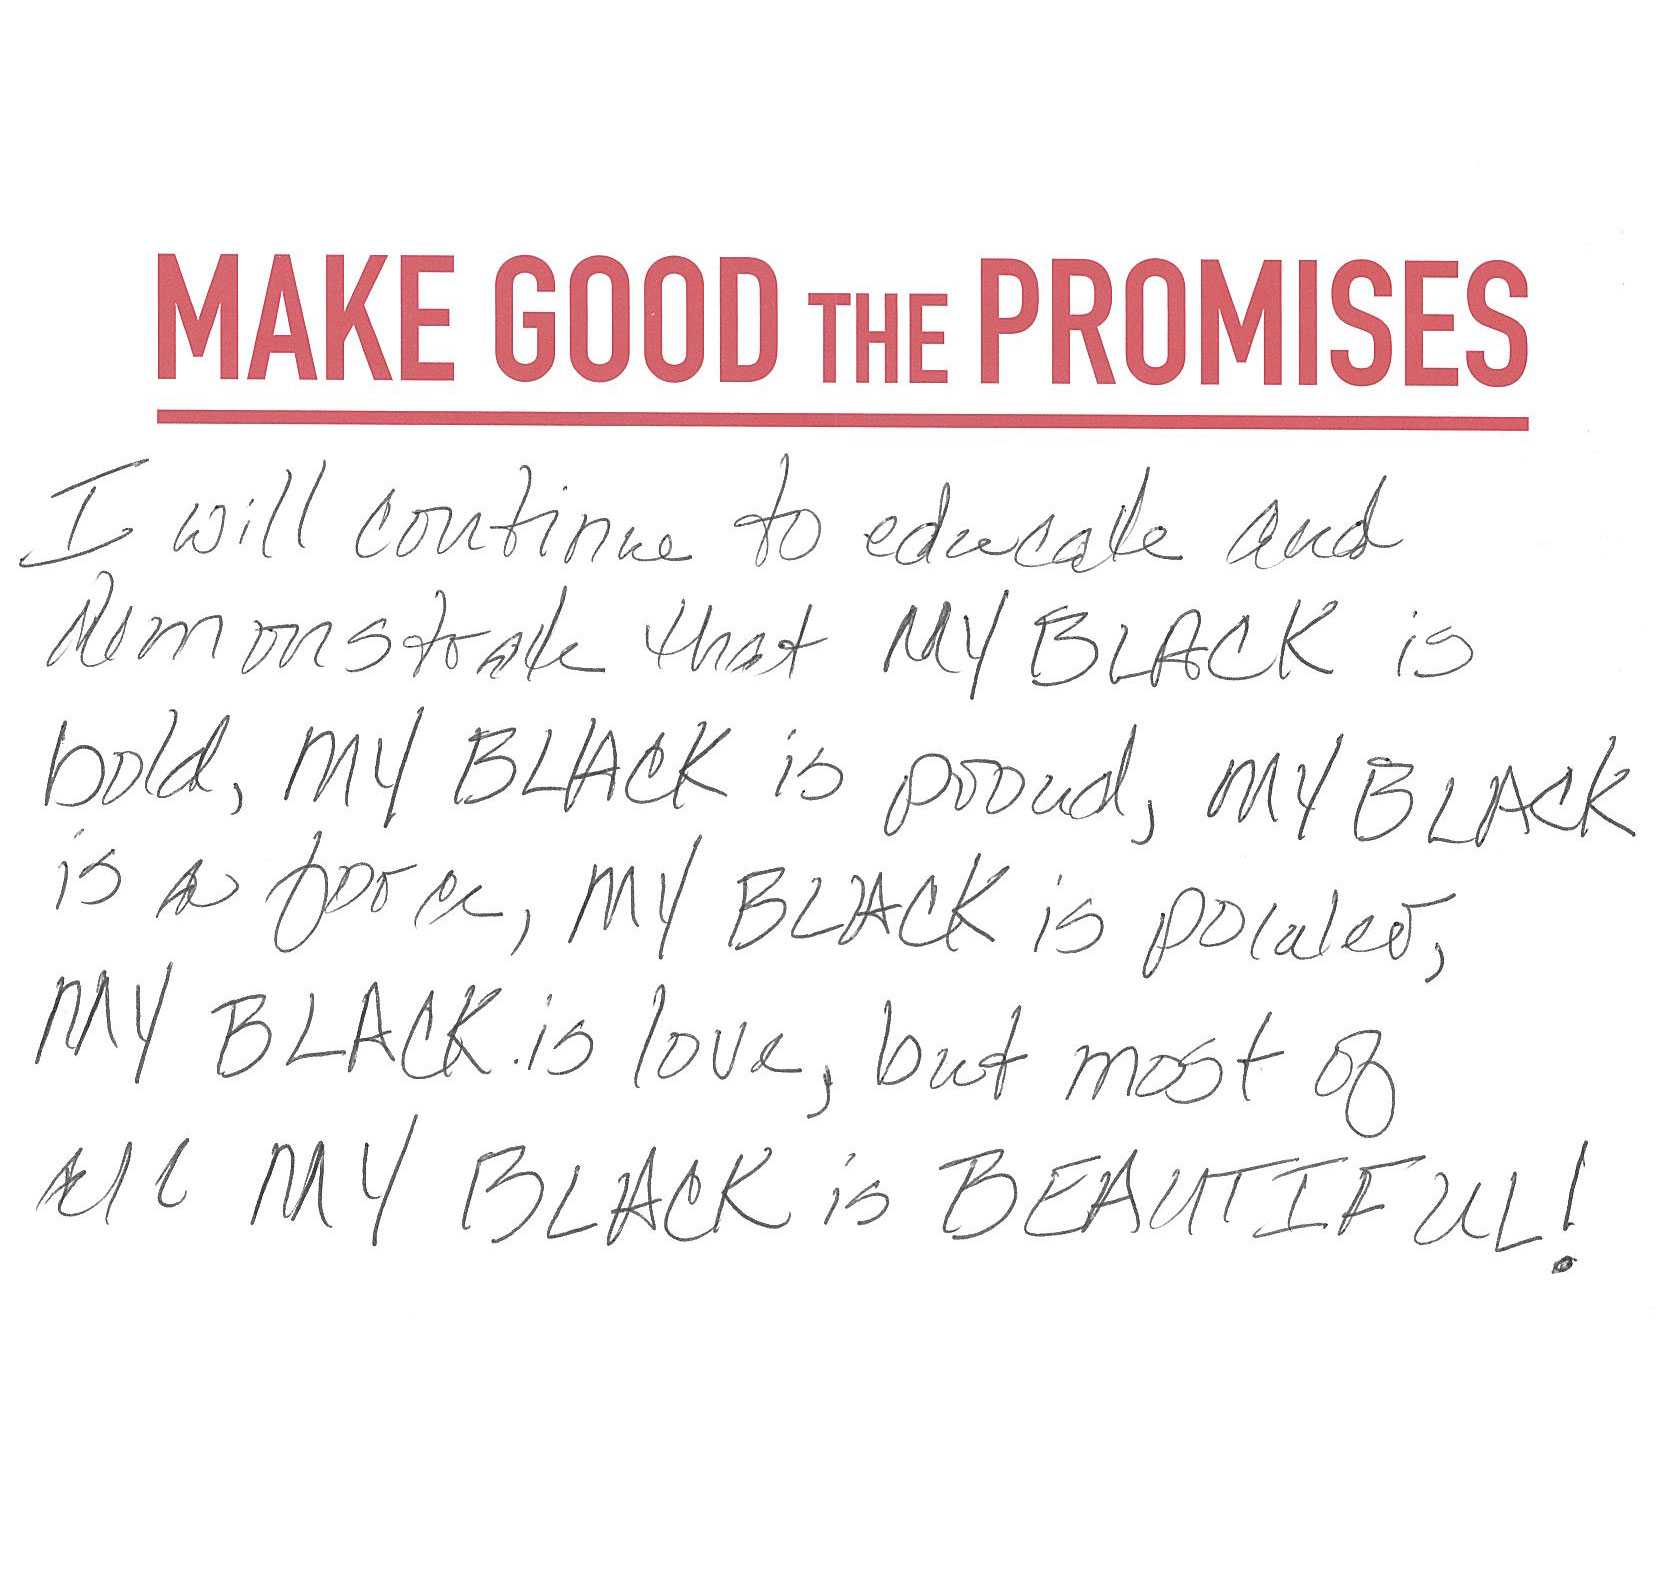 A white card with the handwritten message discussing the beauty and importance of blackness.